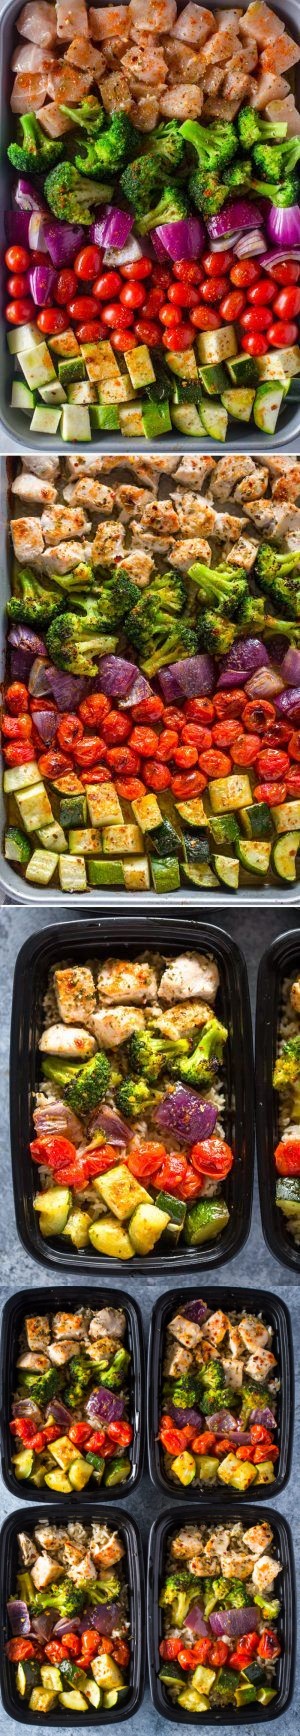 Meal Prep - Healthy Chicken and Veggies